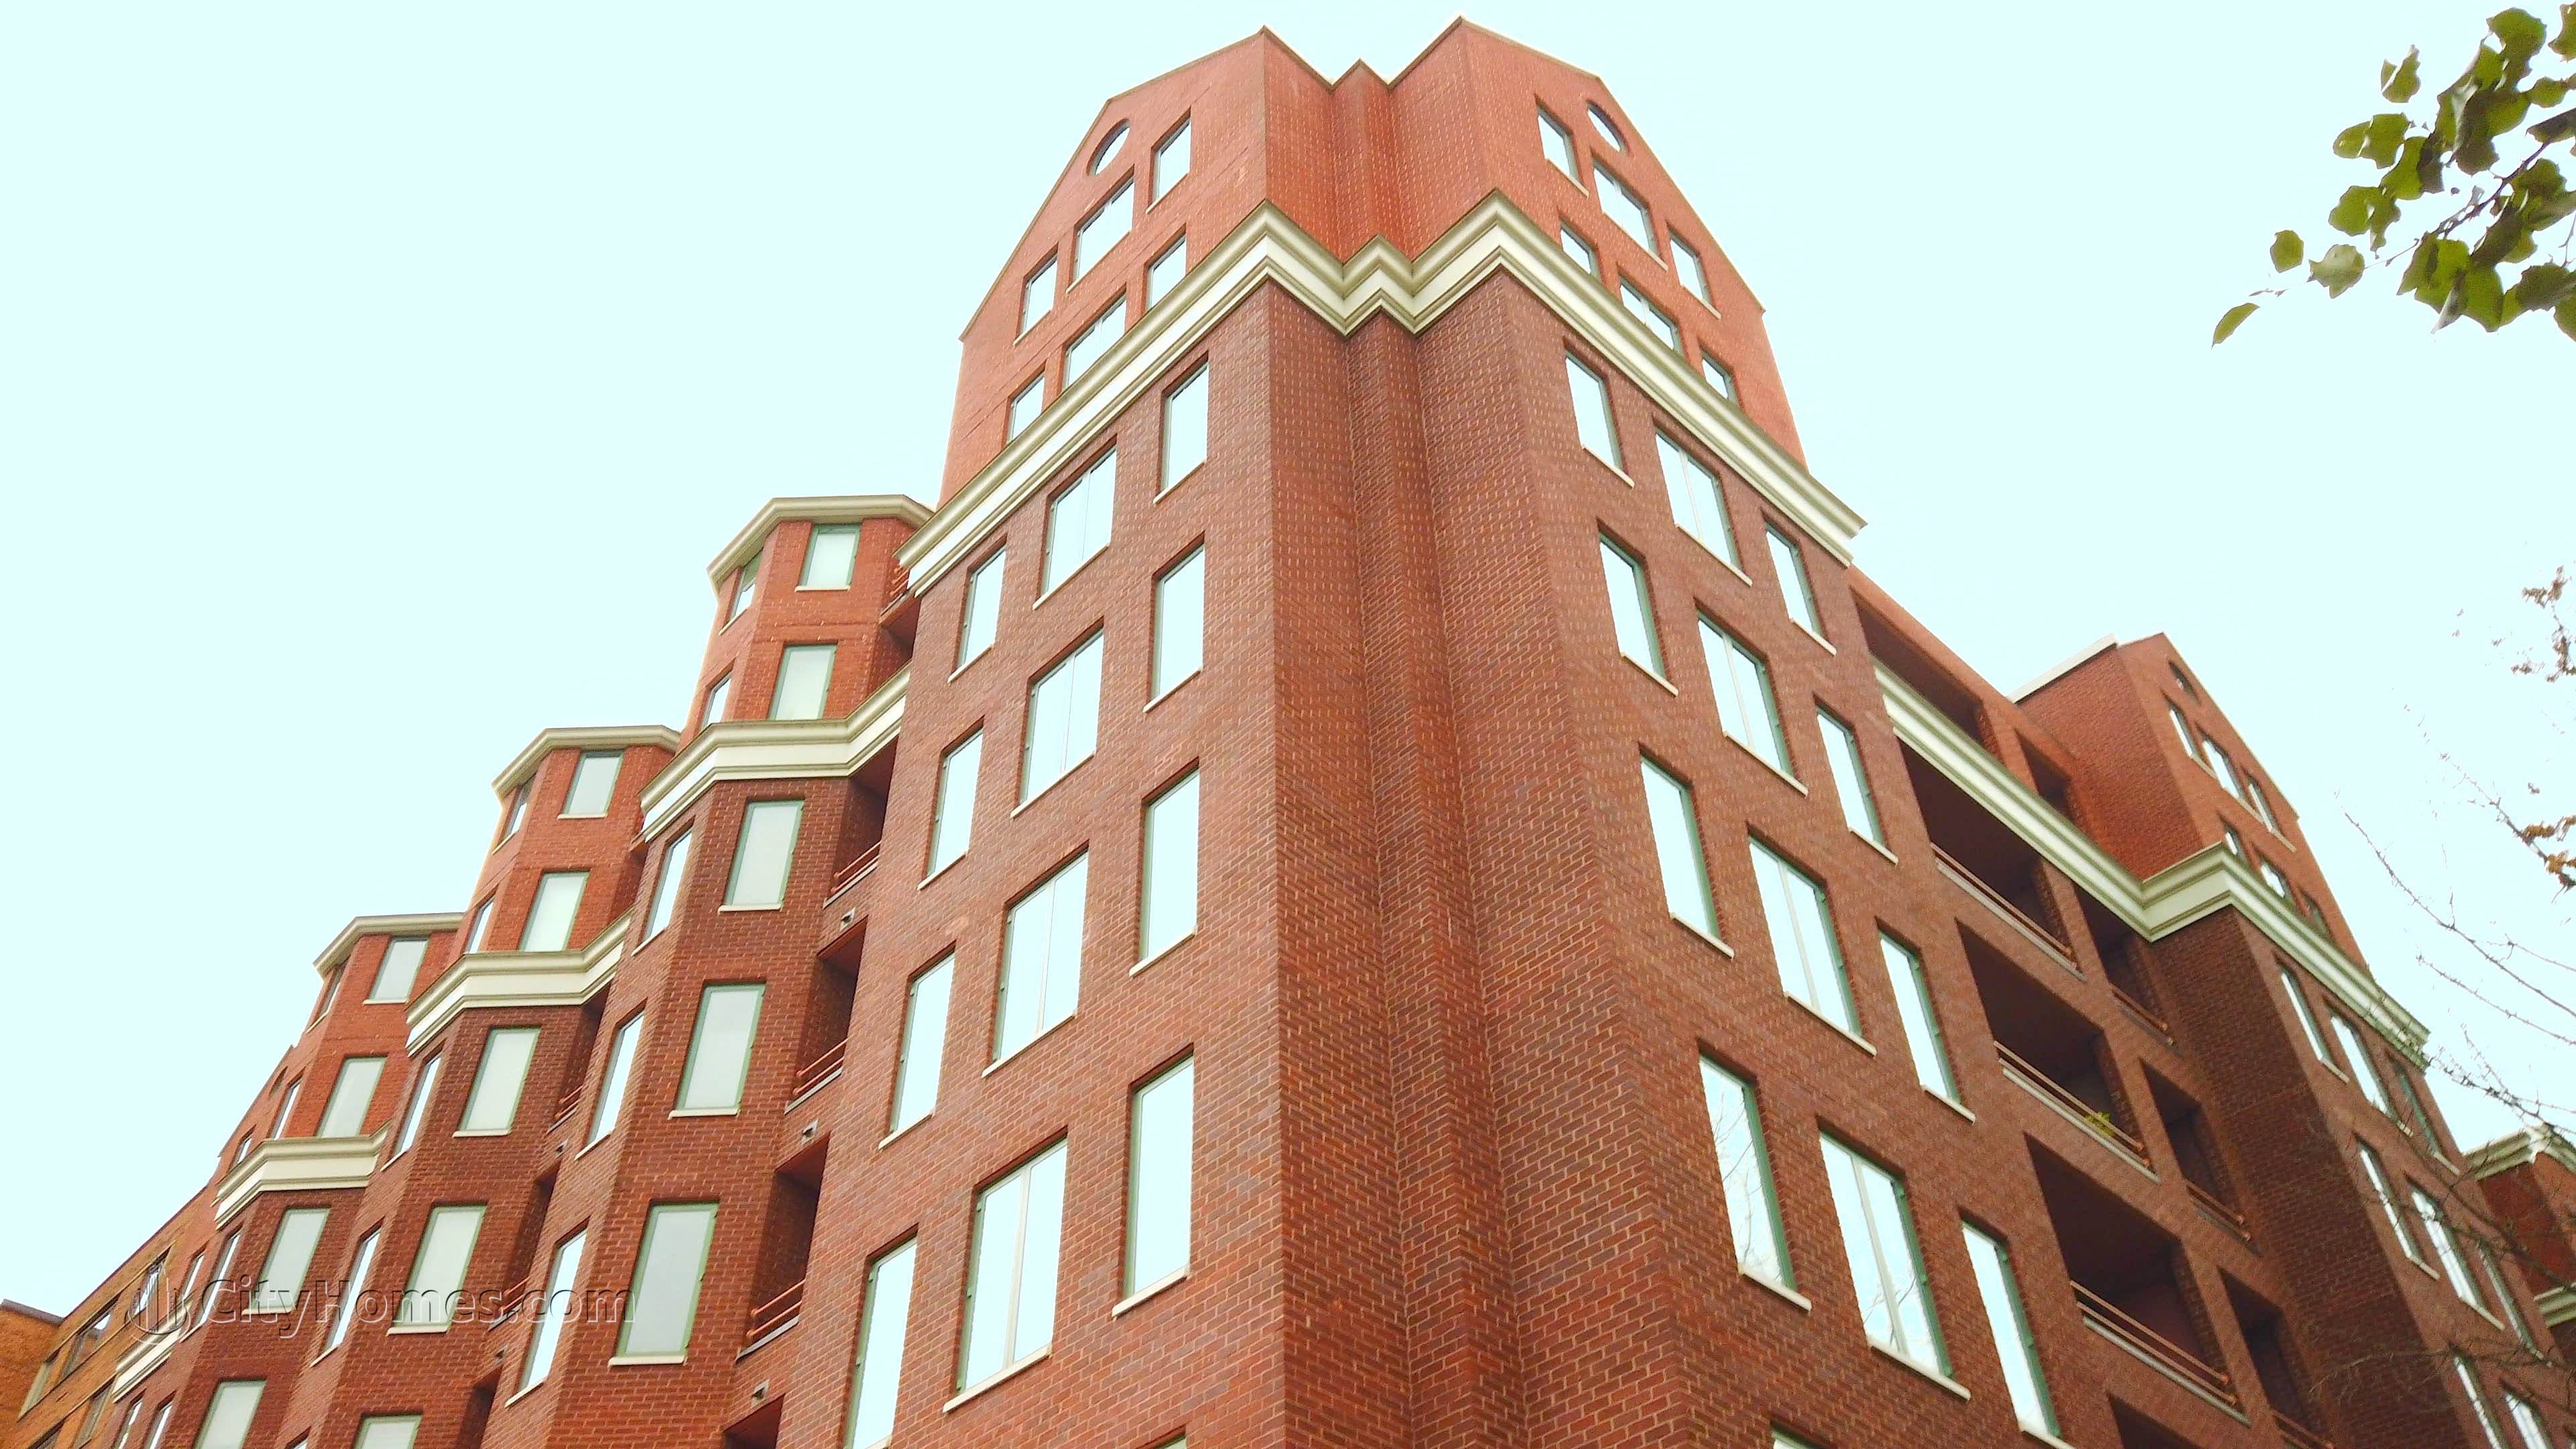 5. The Griffin building at 955 26th St NW, Foggy Bottom, Washington, DC 20037